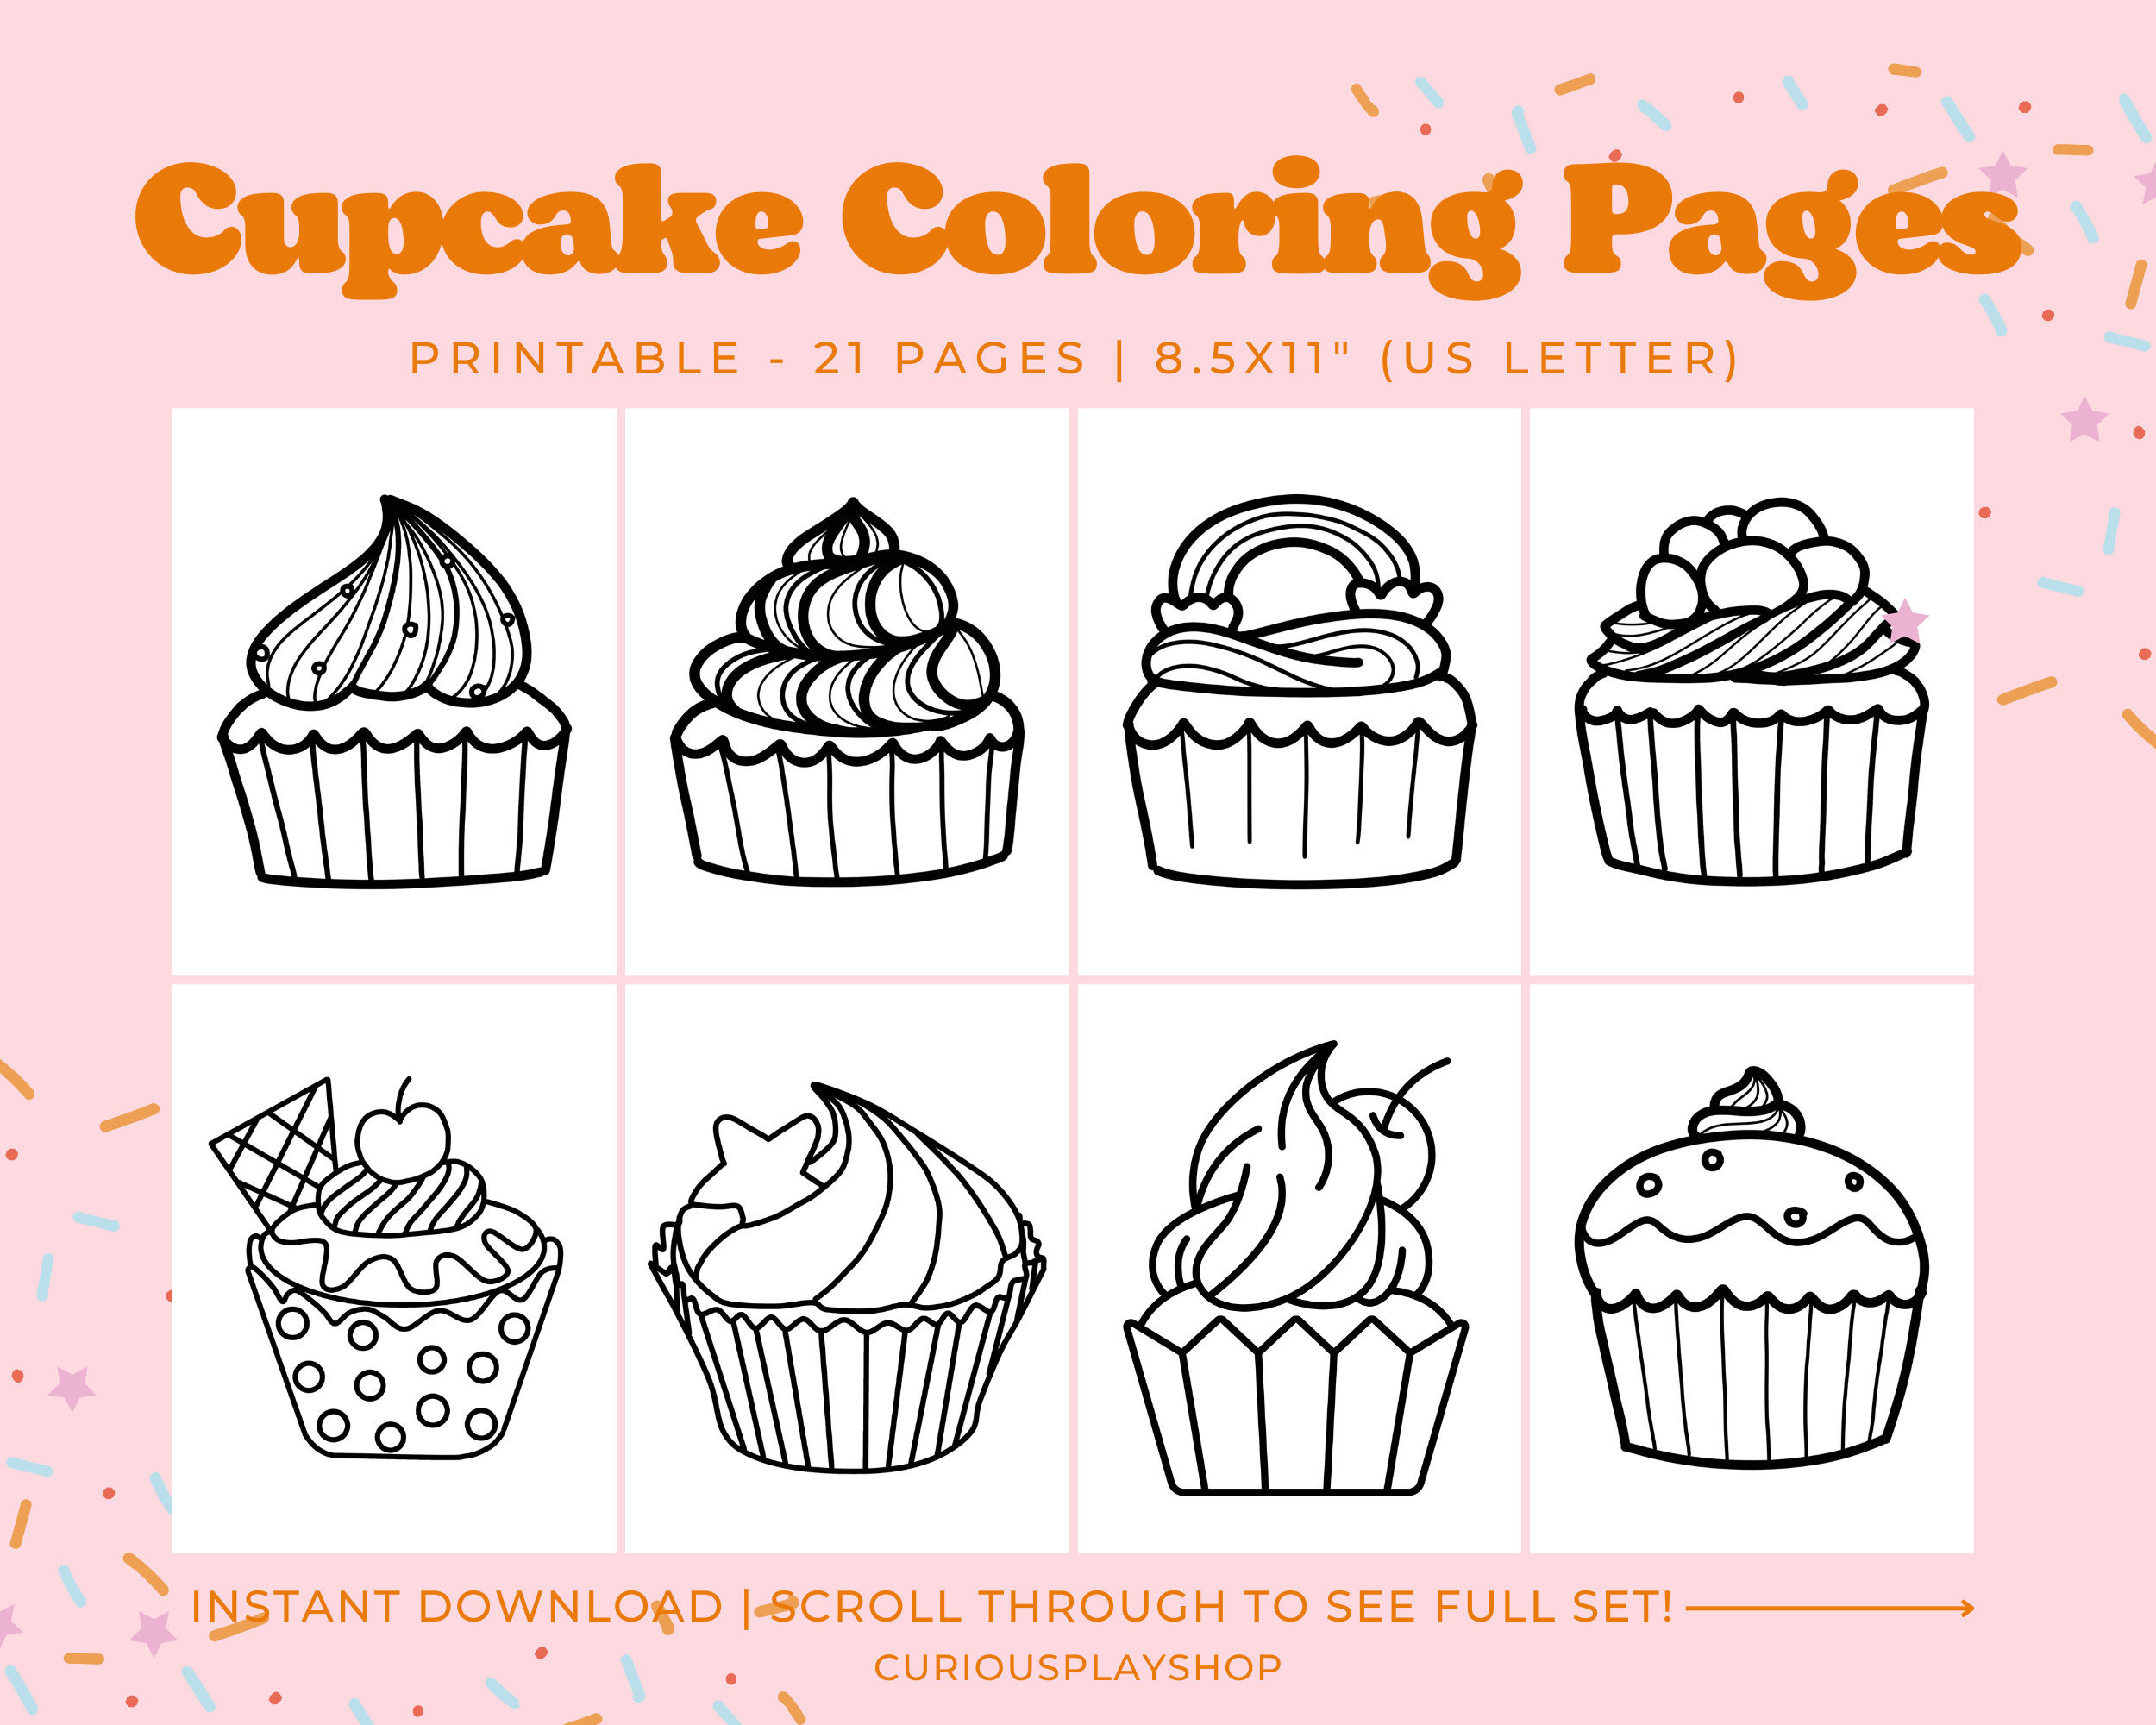 Cupcake coloring pages printable coloring pages cupcake coloring book printable activity for toddlerskids instant download